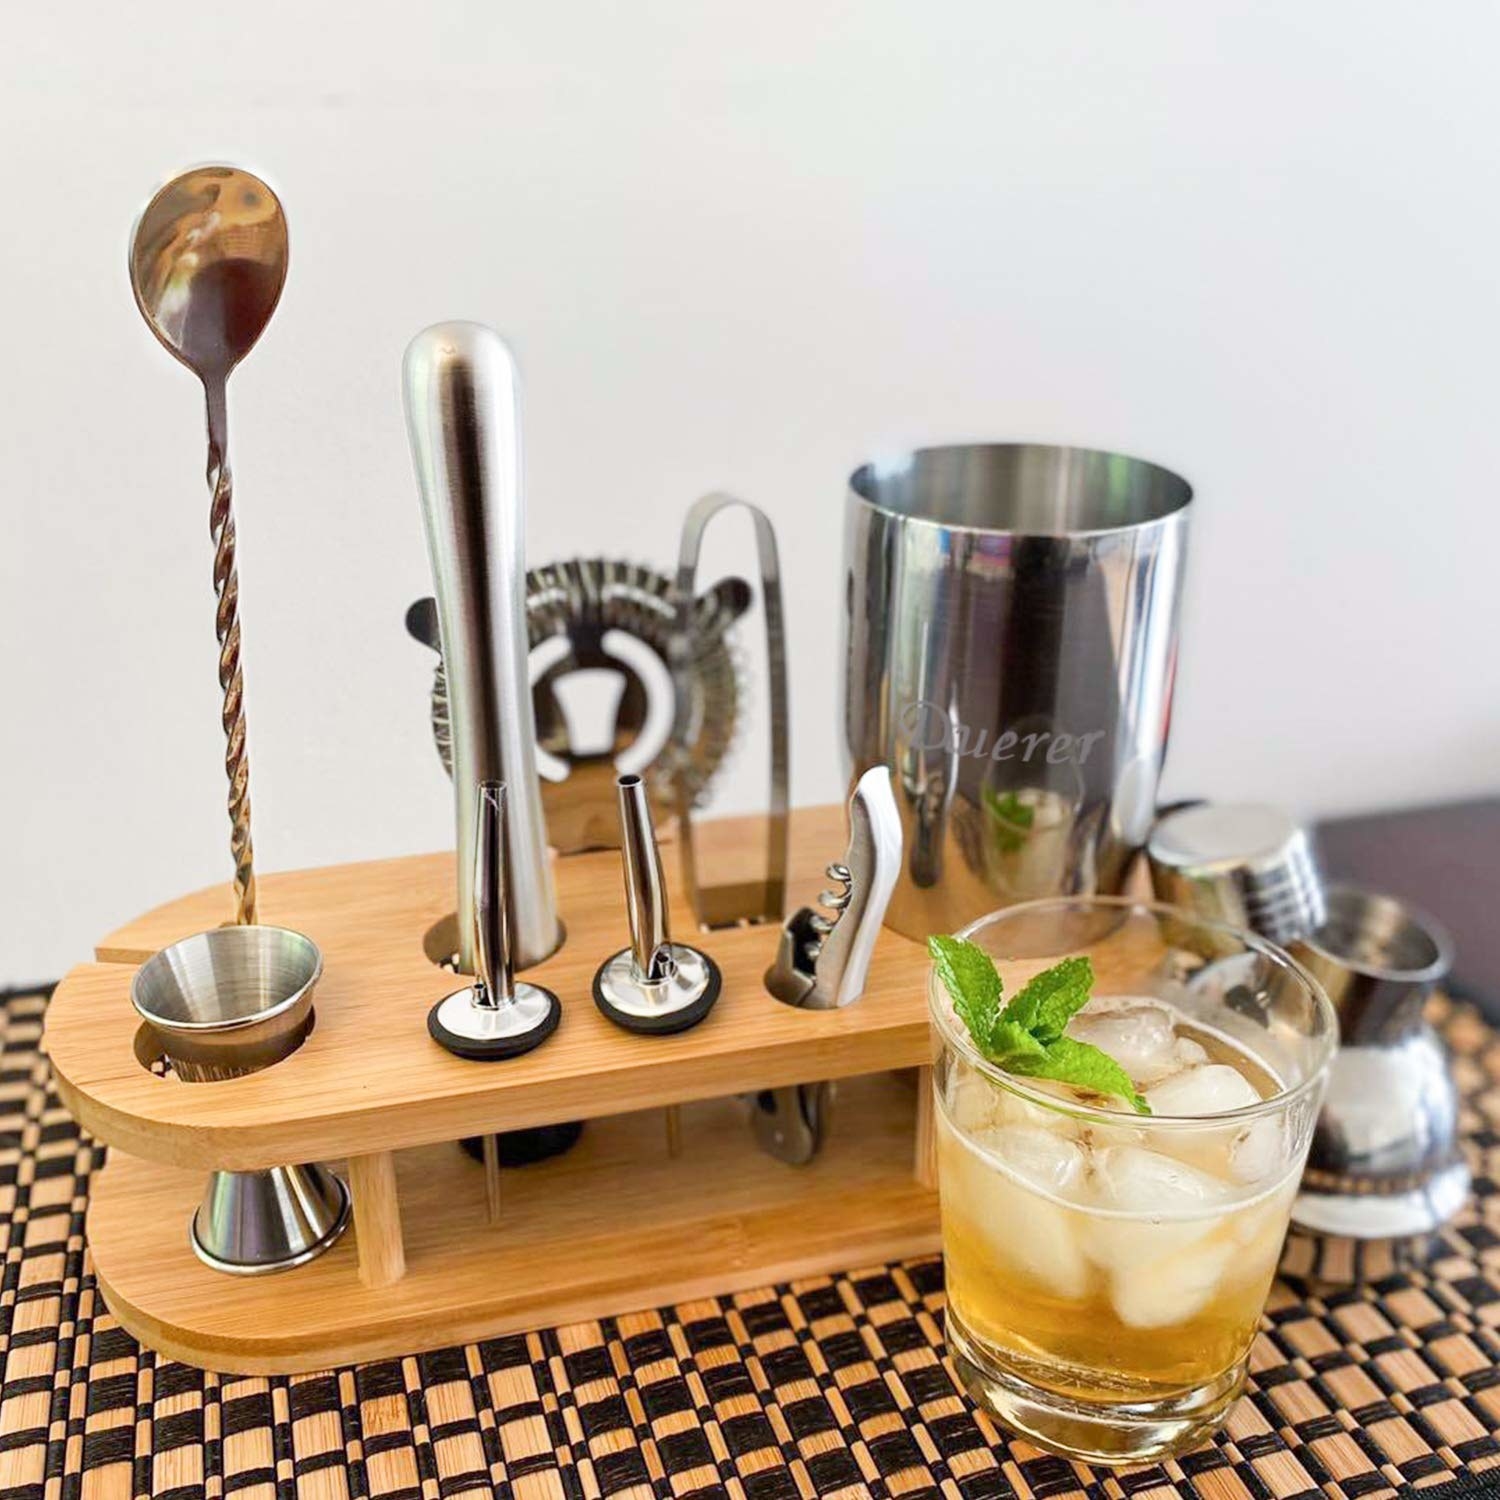 An 11-piece cocktail maker set with a bamboo stand and a cocktail set beside it